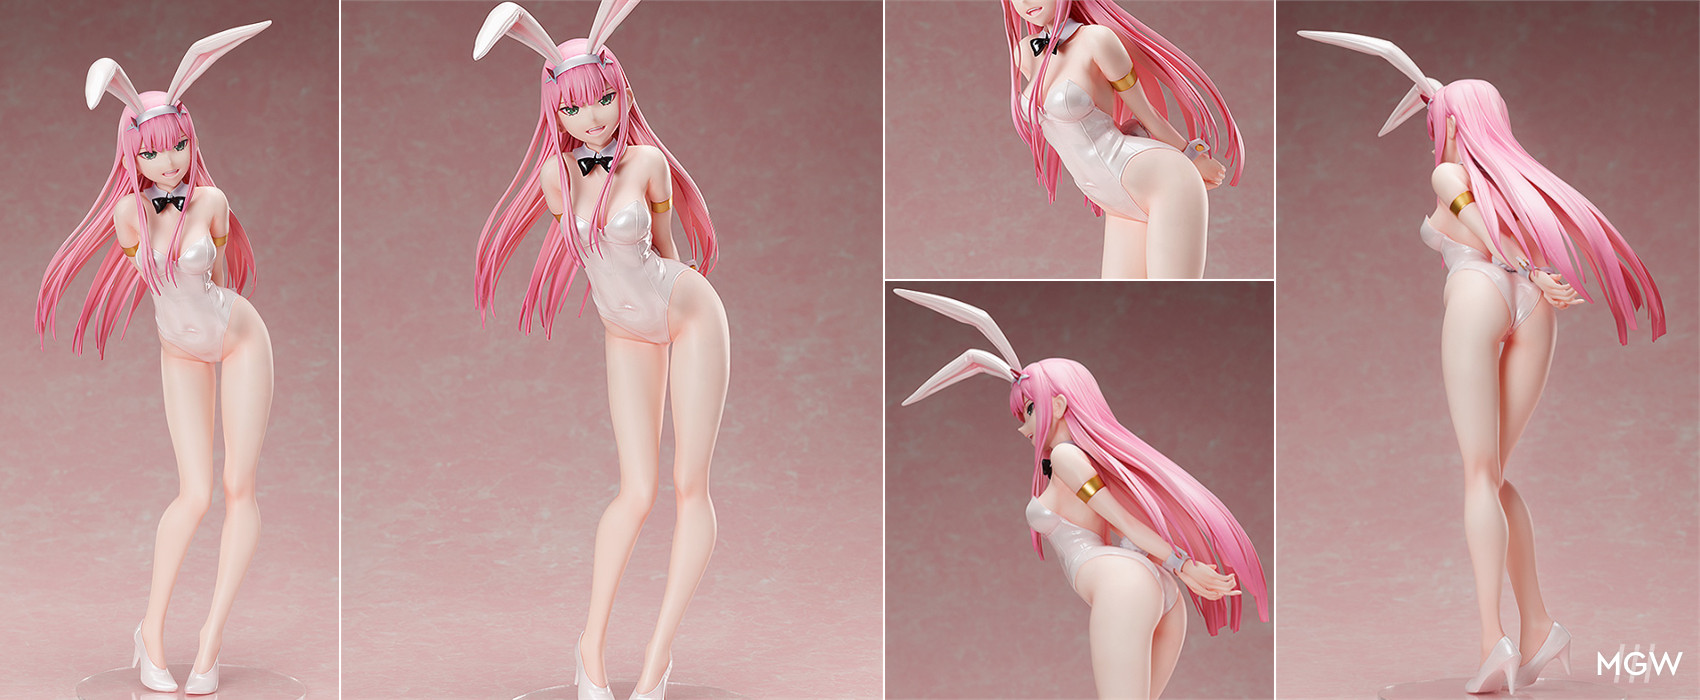 Zero Two Bunny Ver. 2nd by FREEing from DARLING in the FRANXX MyGrailWatch Anime Figure Guide